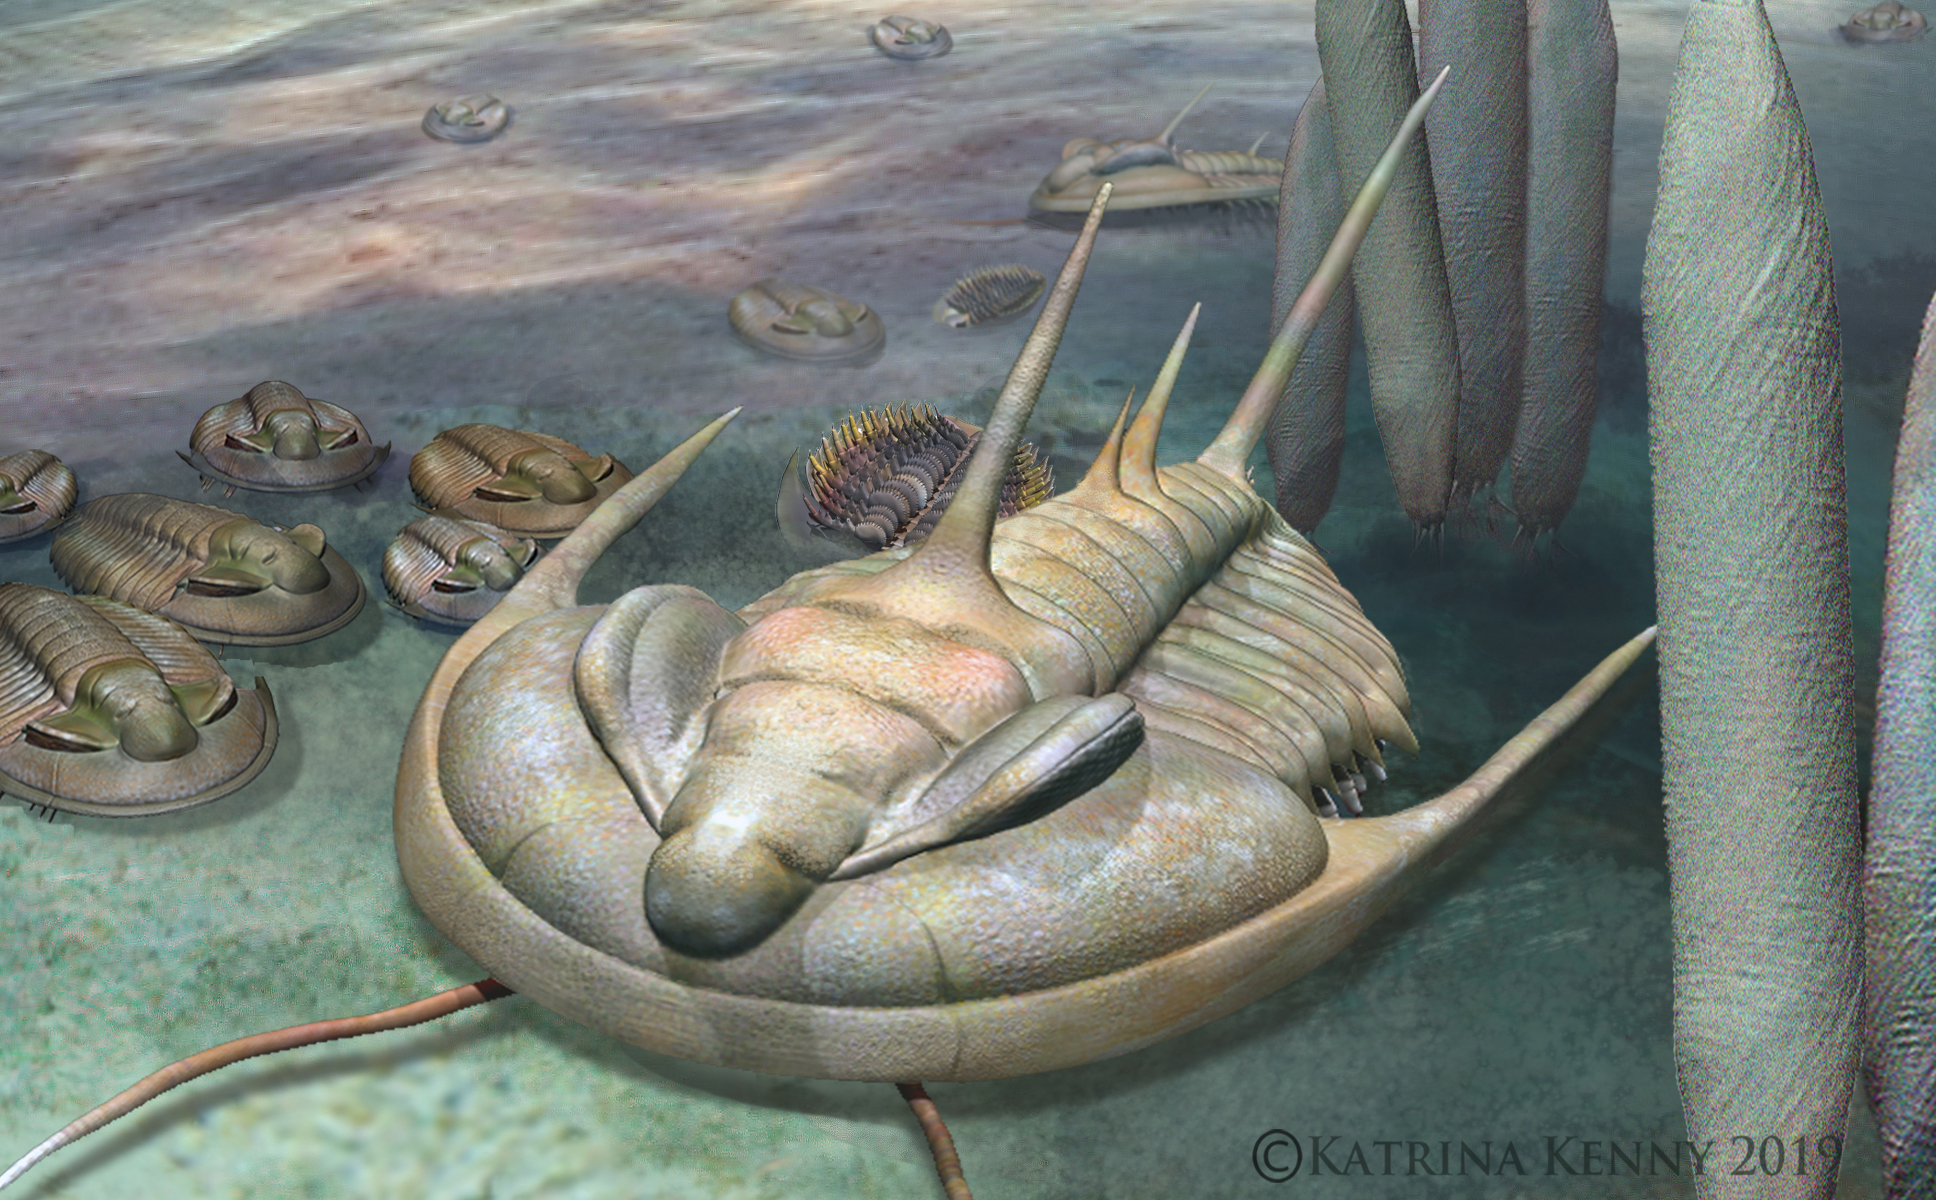 An artists impression of a Redlichia trilobite on the Cambrian seafloor. Artwork by Katrina Kenny